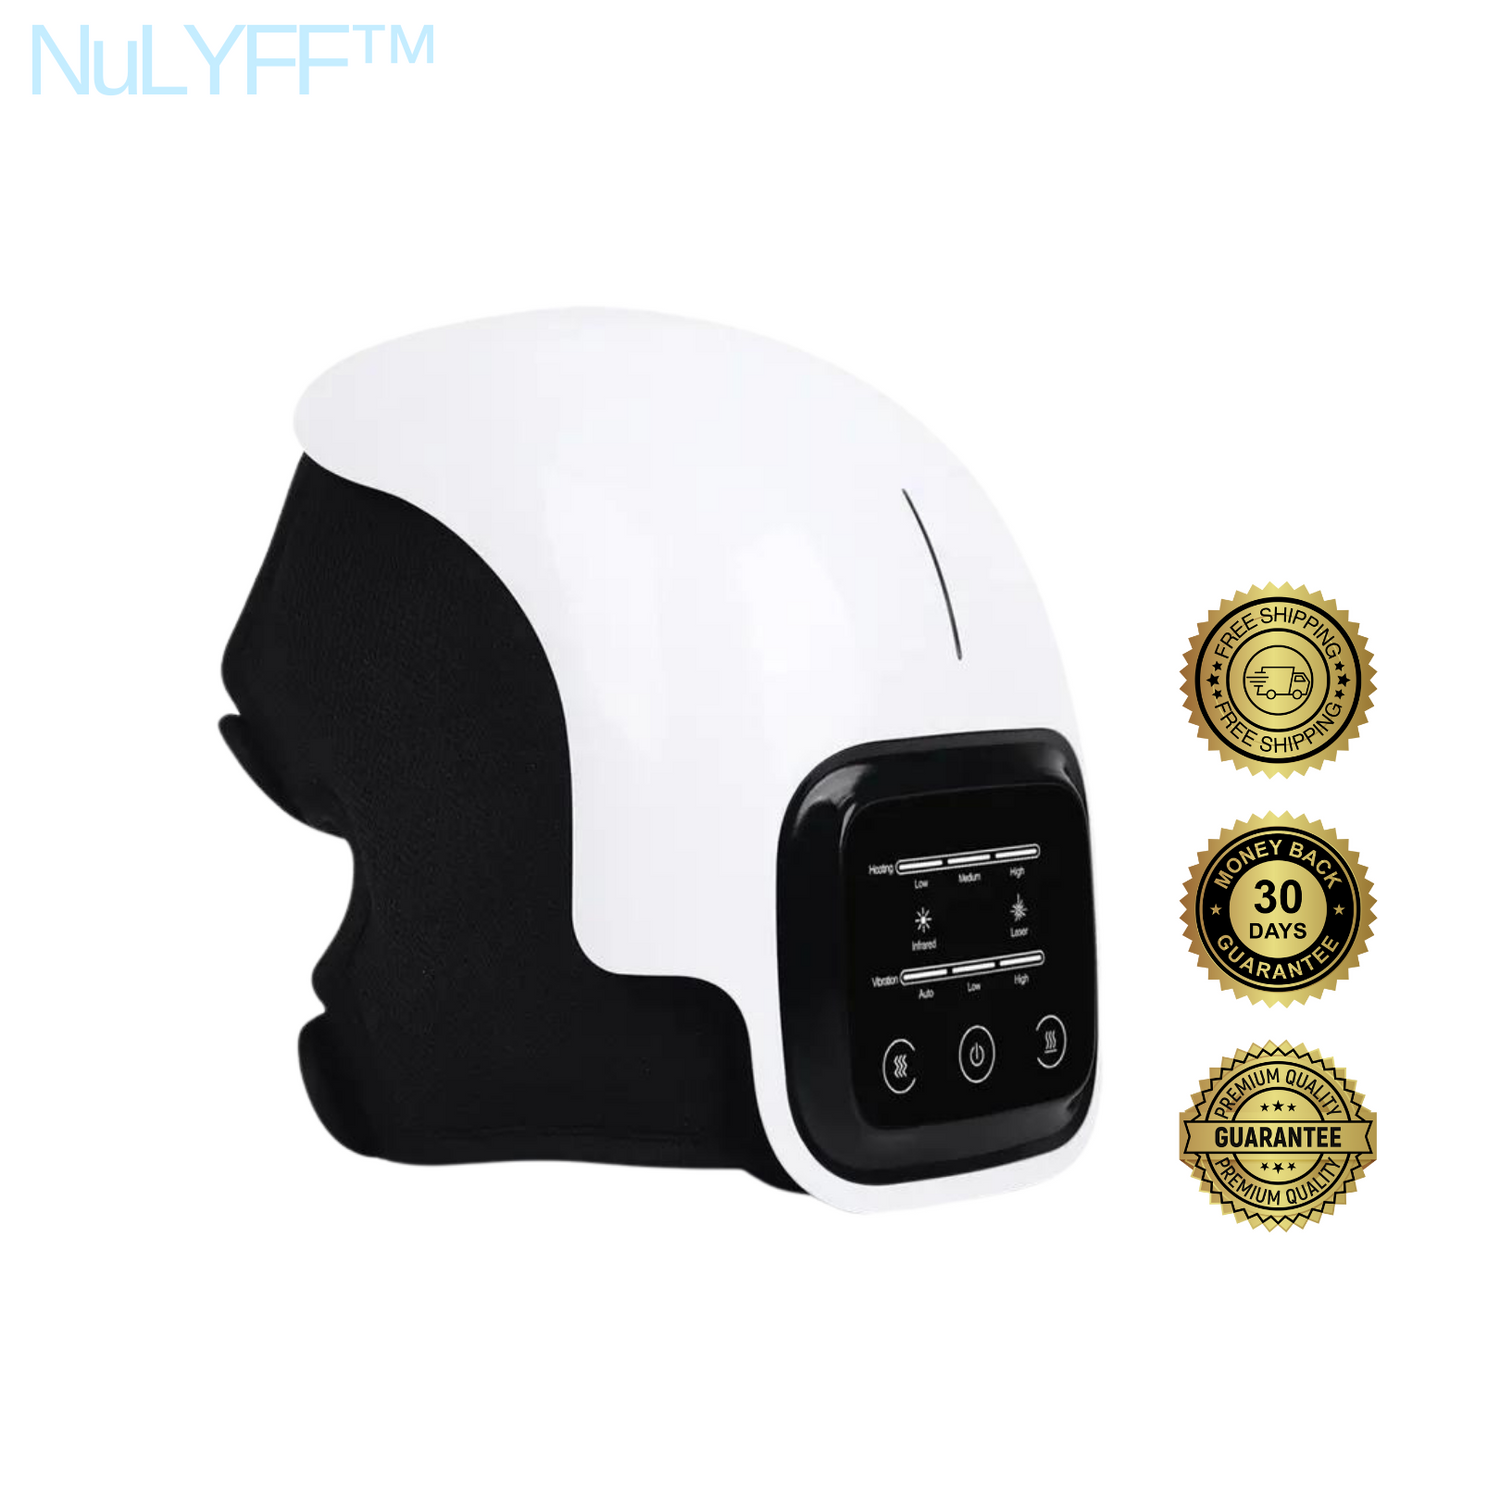 Image of NuLYFF™ Knee Massager - Free shipping, 30 day money back guarantee, and high quality guarantee.